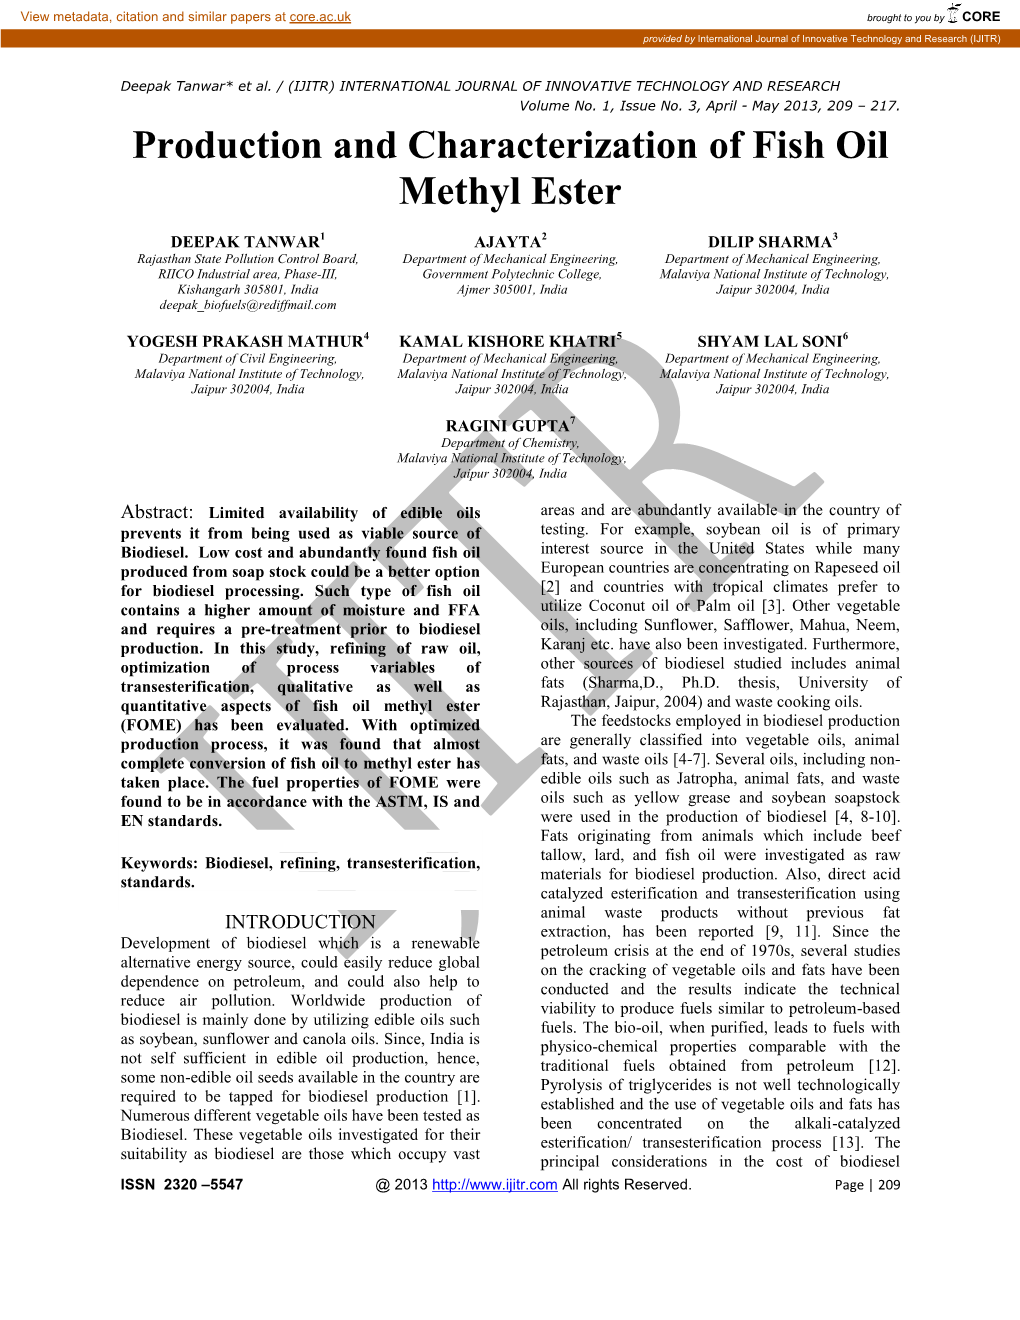 Production and Characterization of Fish Oil Methyl Ester